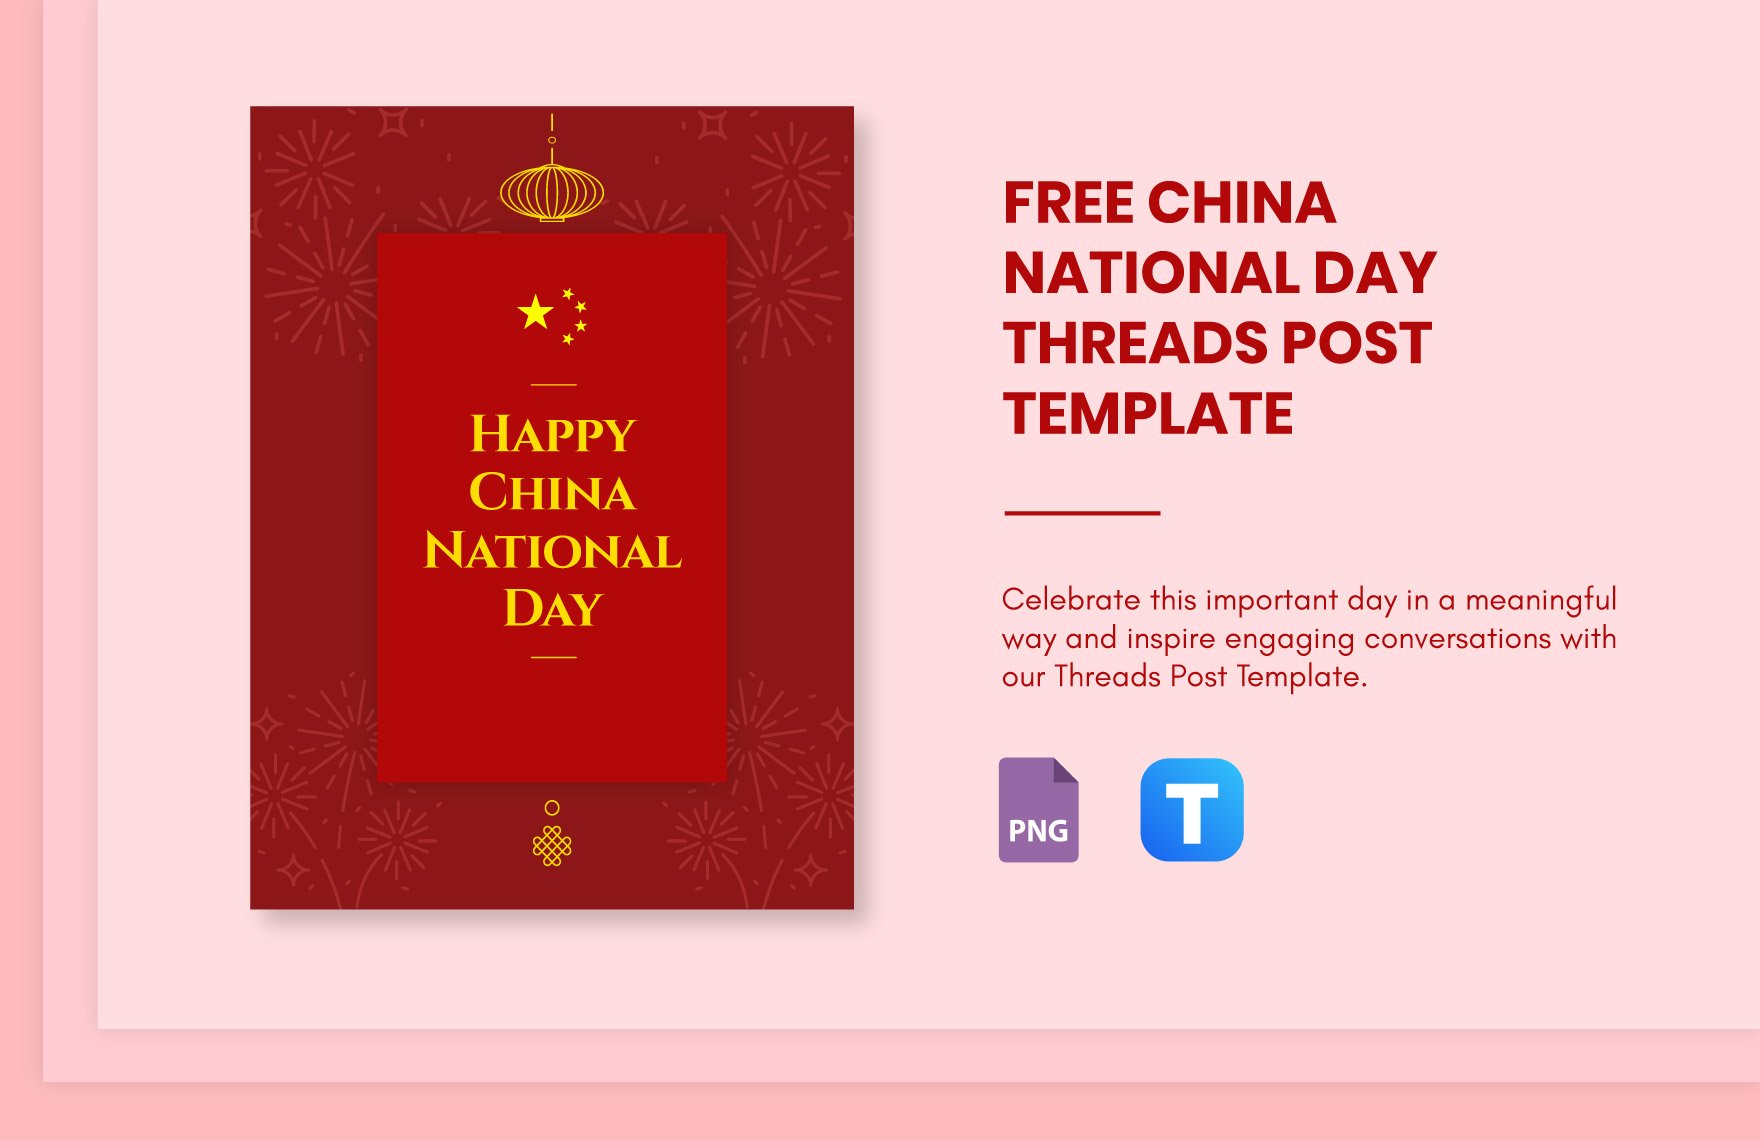 Free China National Day Threads Post Template in PNG